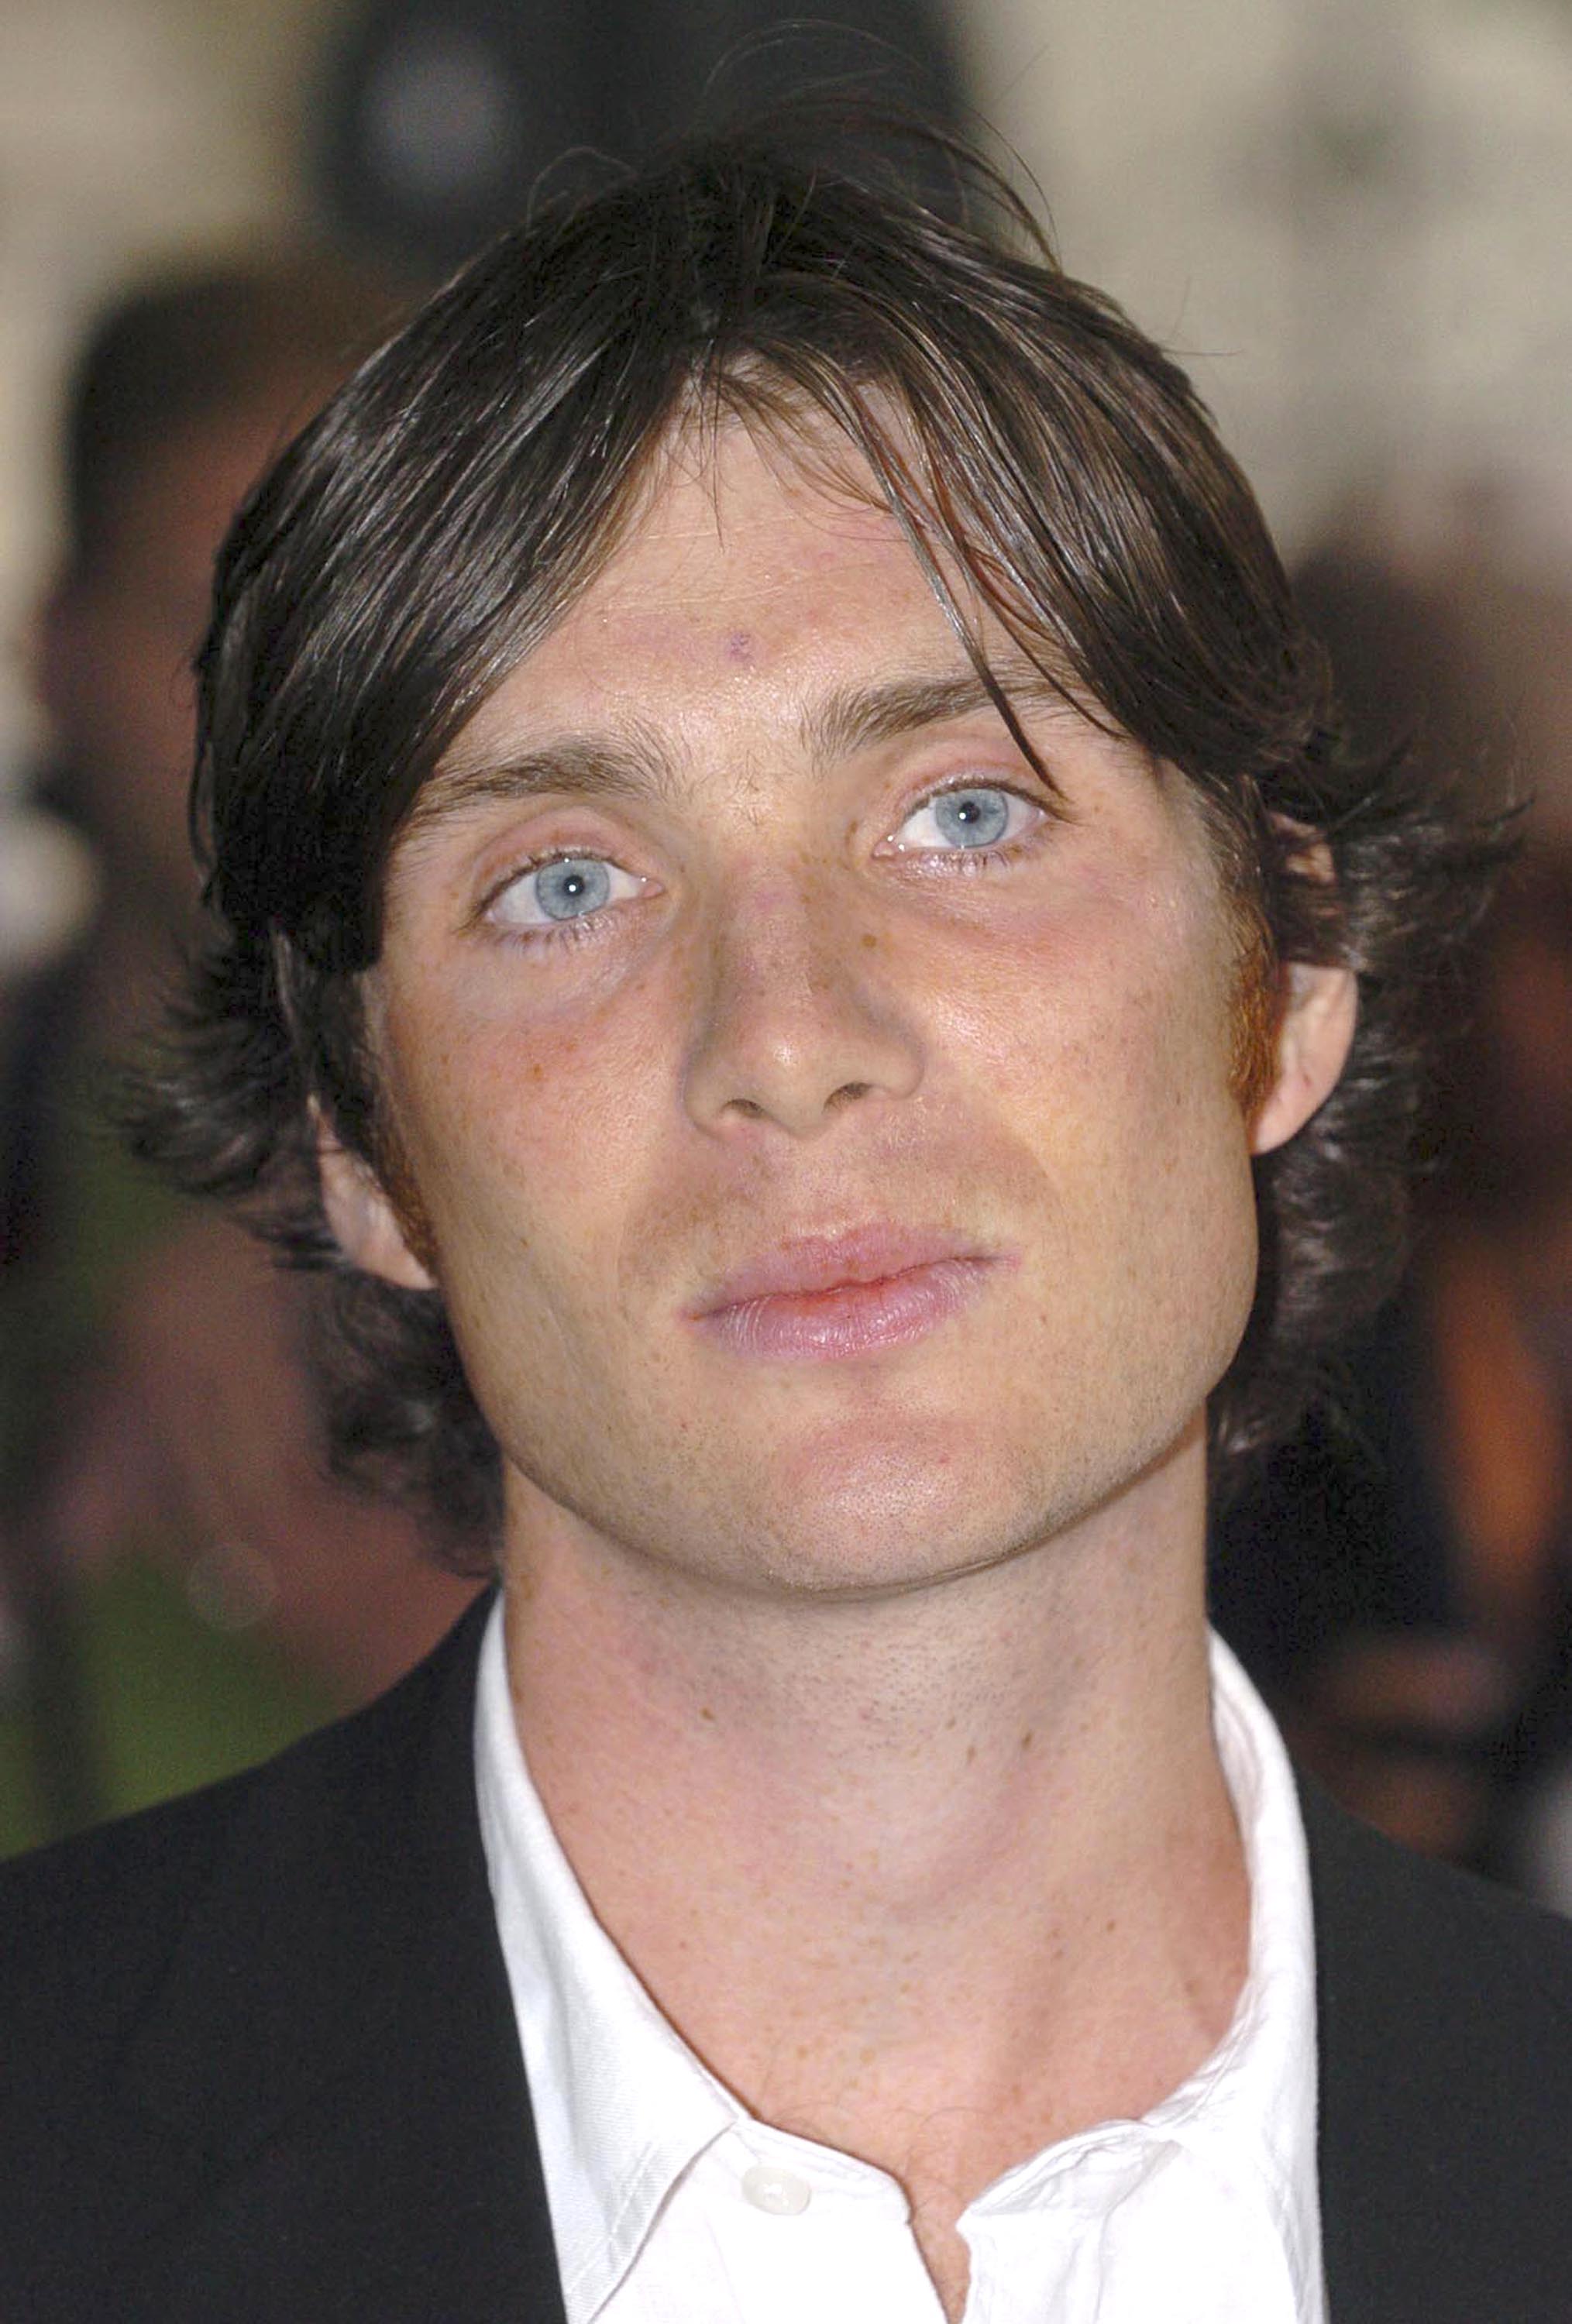 Cillian Murphy attends "The Wind That Shakes The Barley" London premiere on June 21, 2006 in London, England | Source: Getty Images